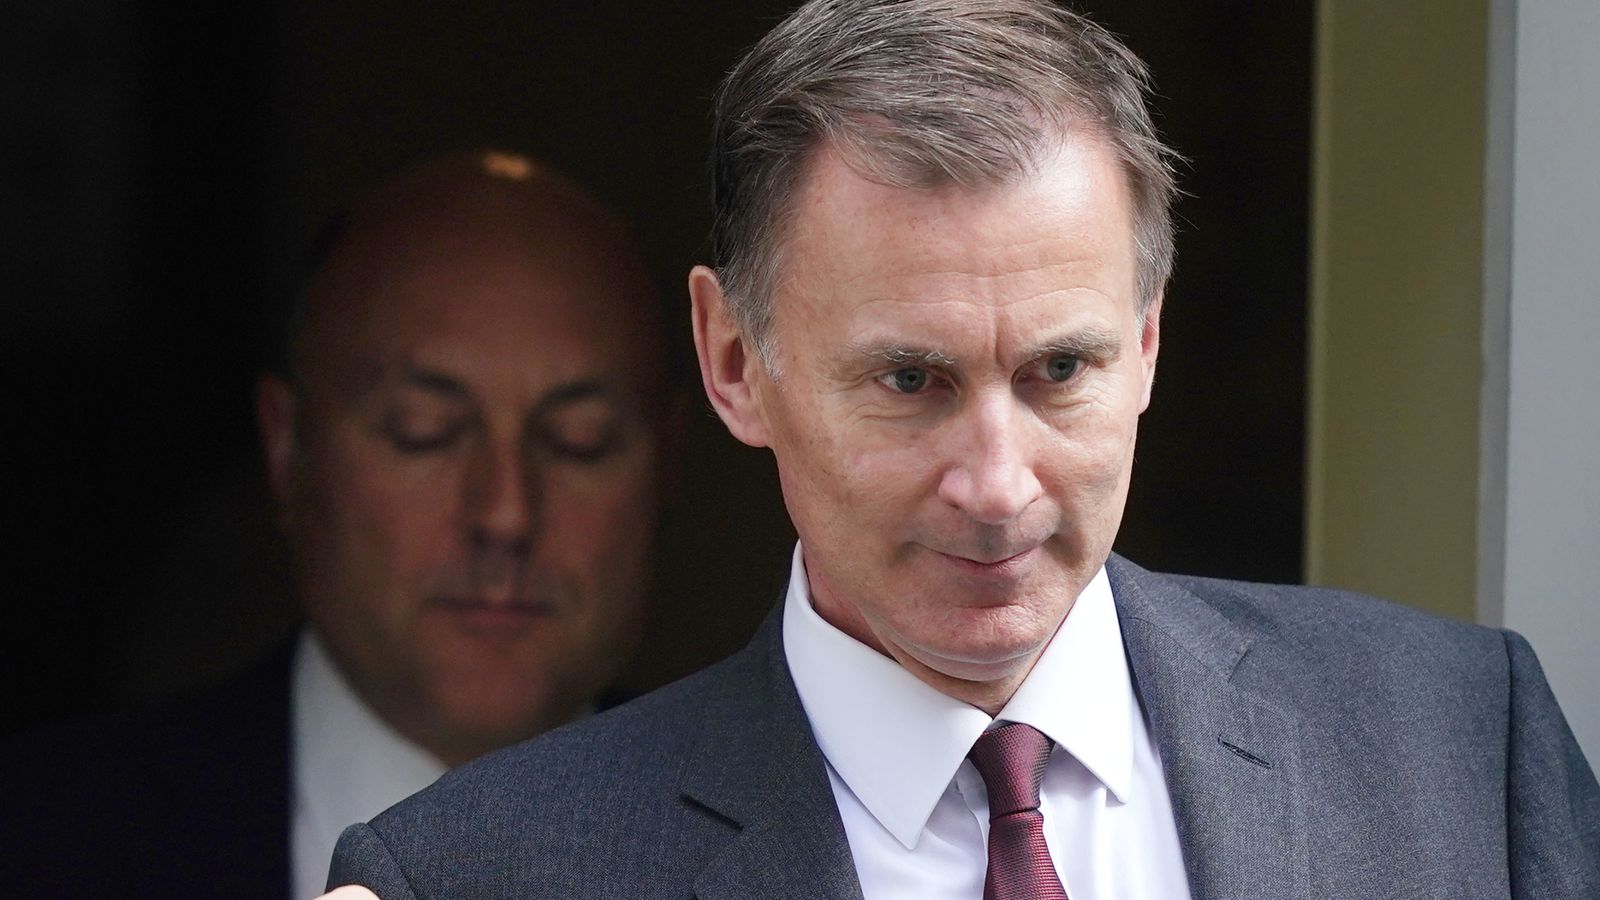 GB News breached impartiality rules after chancellor interviewed by Tory MPs, Ofcom finds